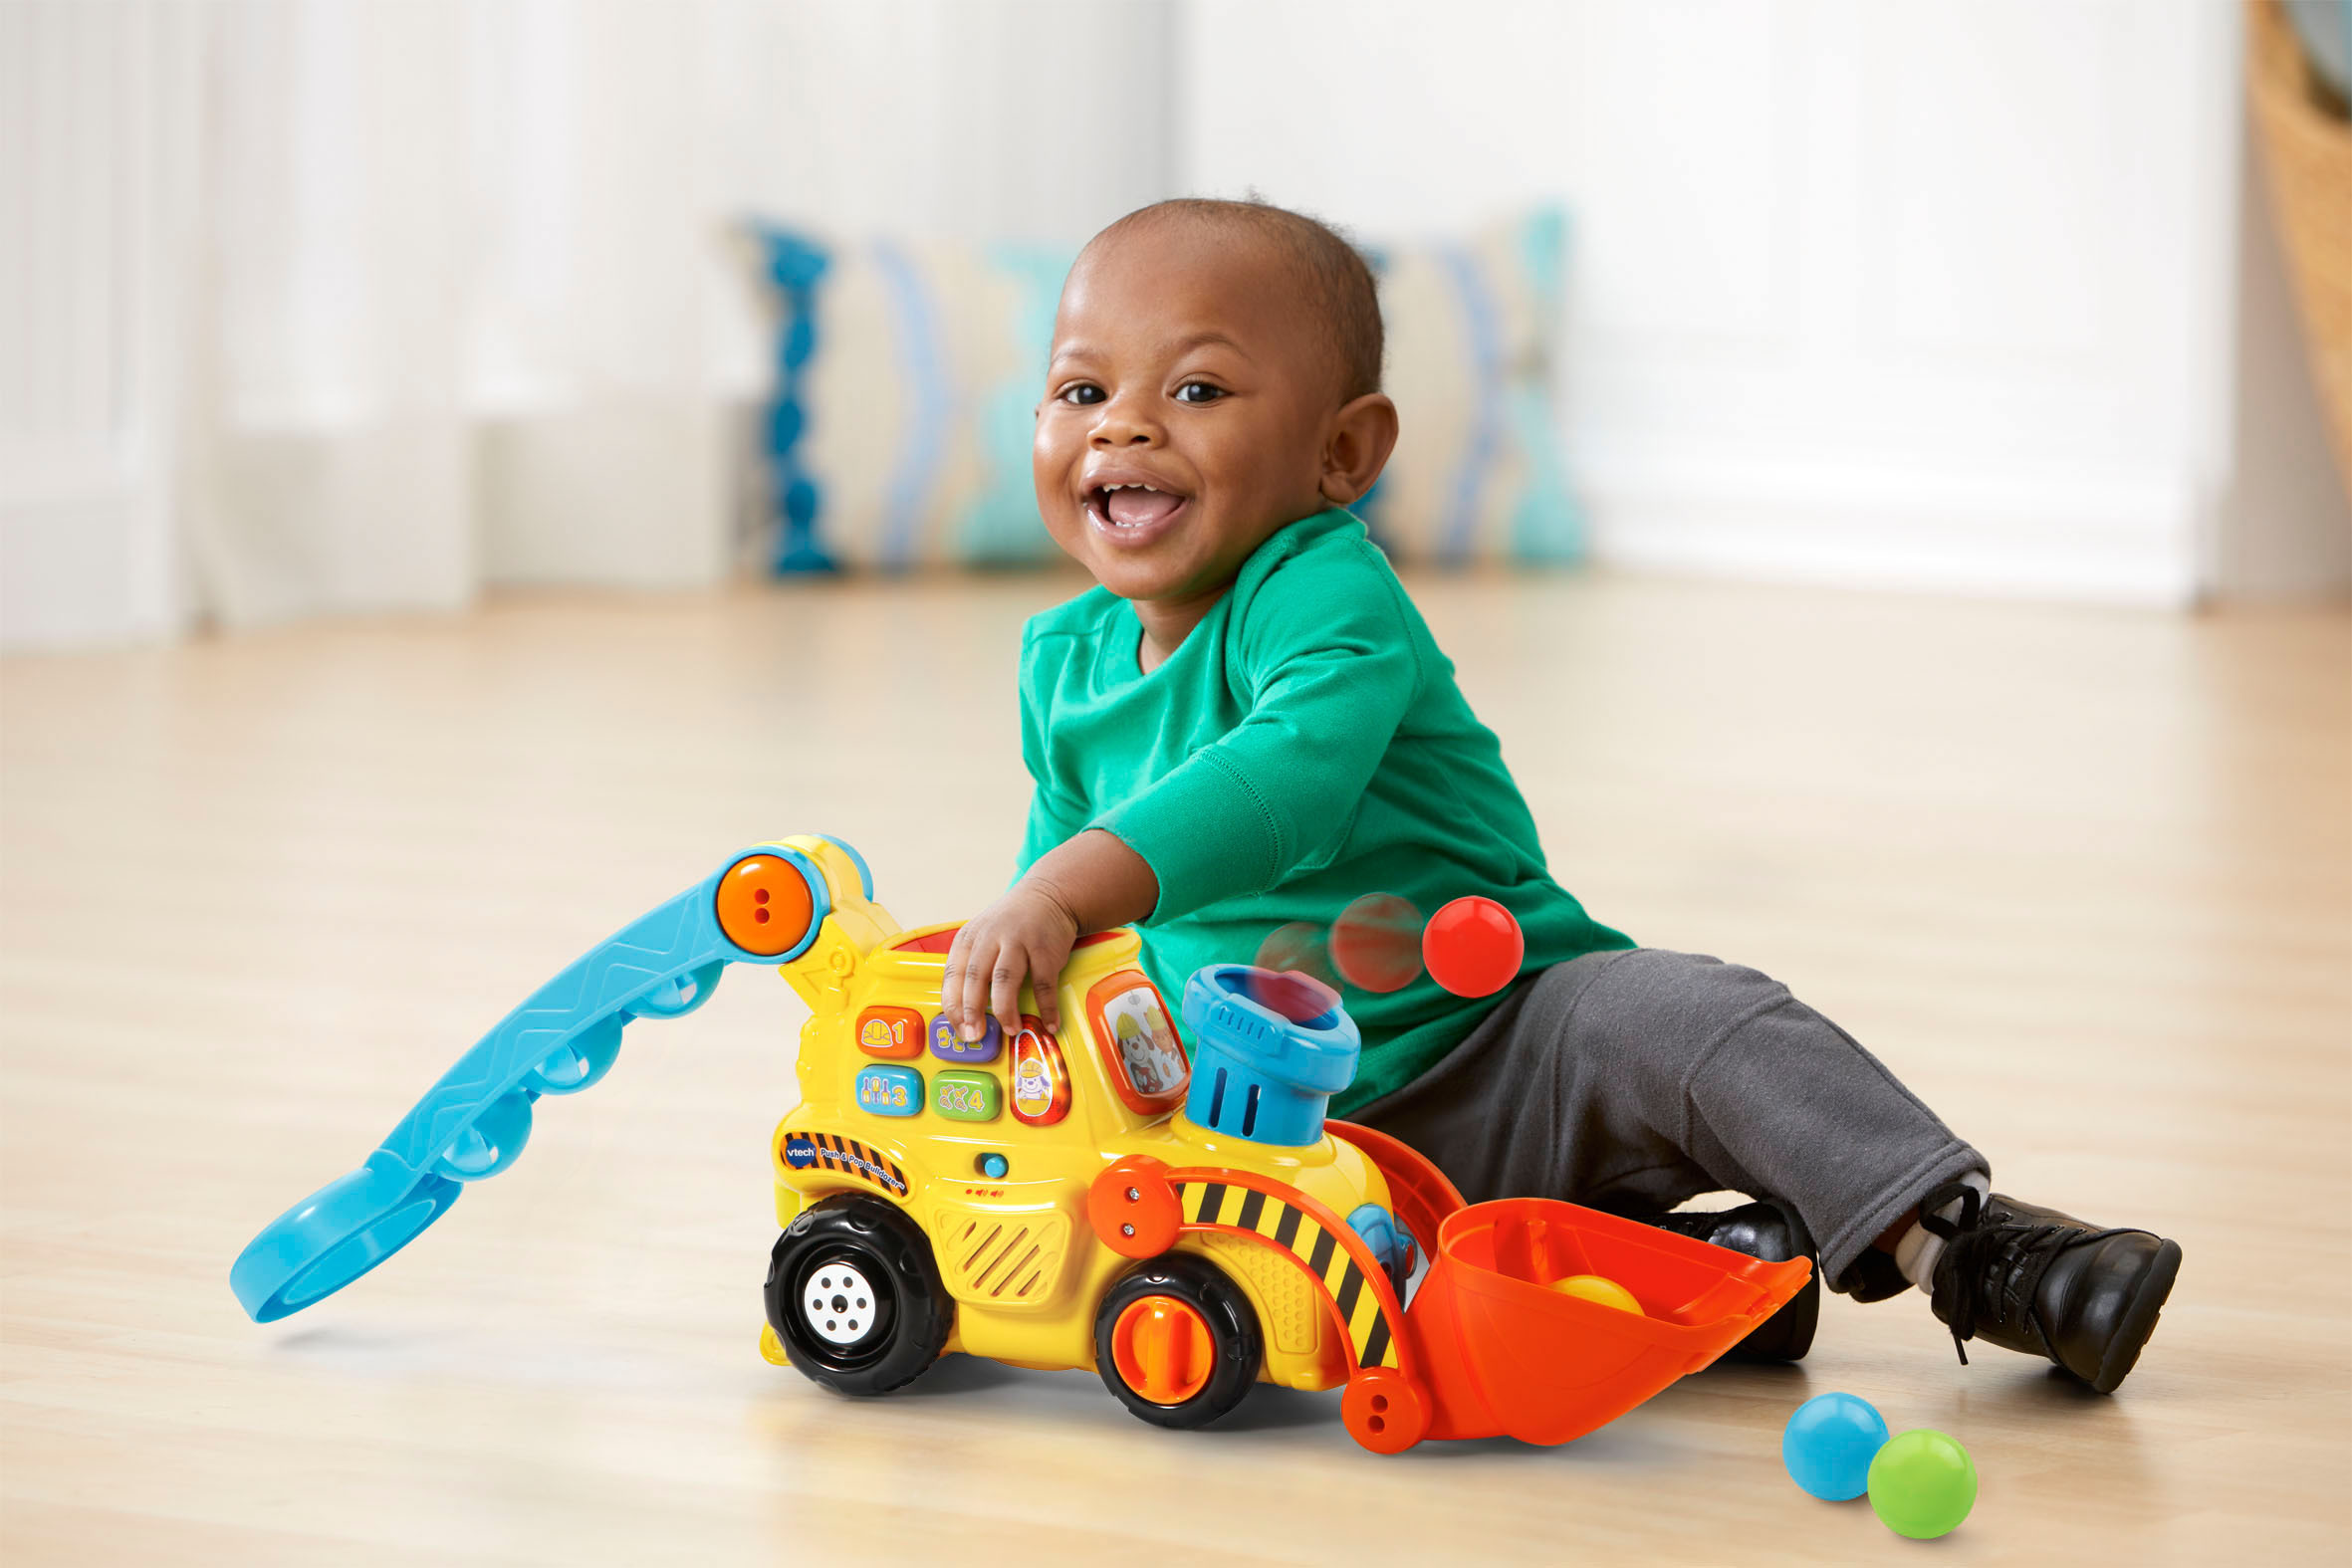 VTech® Provides Kids an Active Play Experience with New Kidi Star Dance™